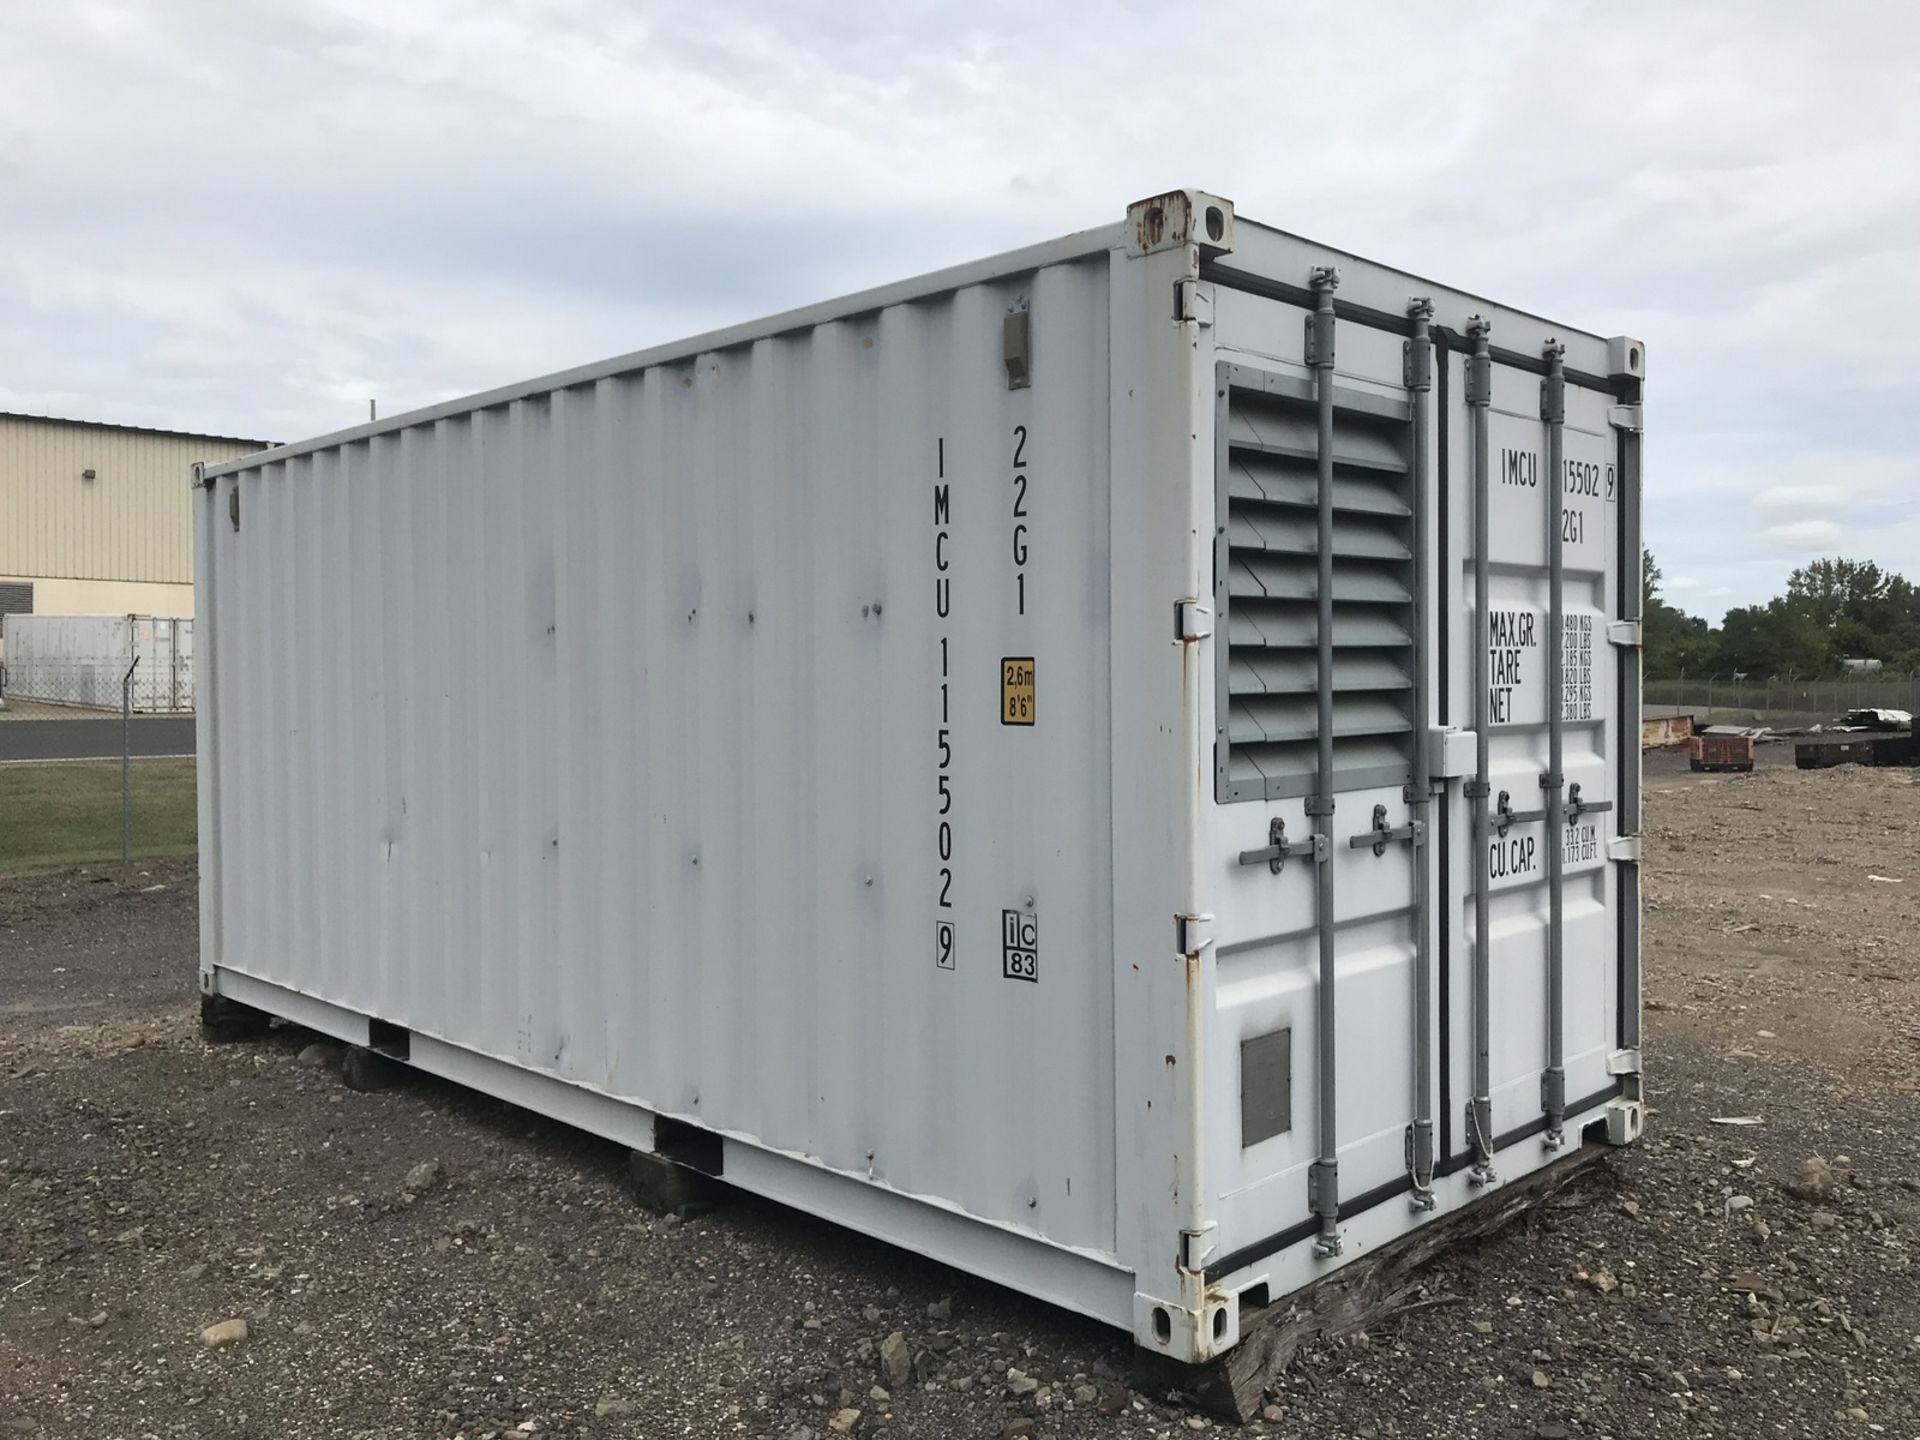 Portable Jobsite Standby Generator Set in a 20' Shipping Container, Includes a Kohler Mdl. - Image 11 of 13